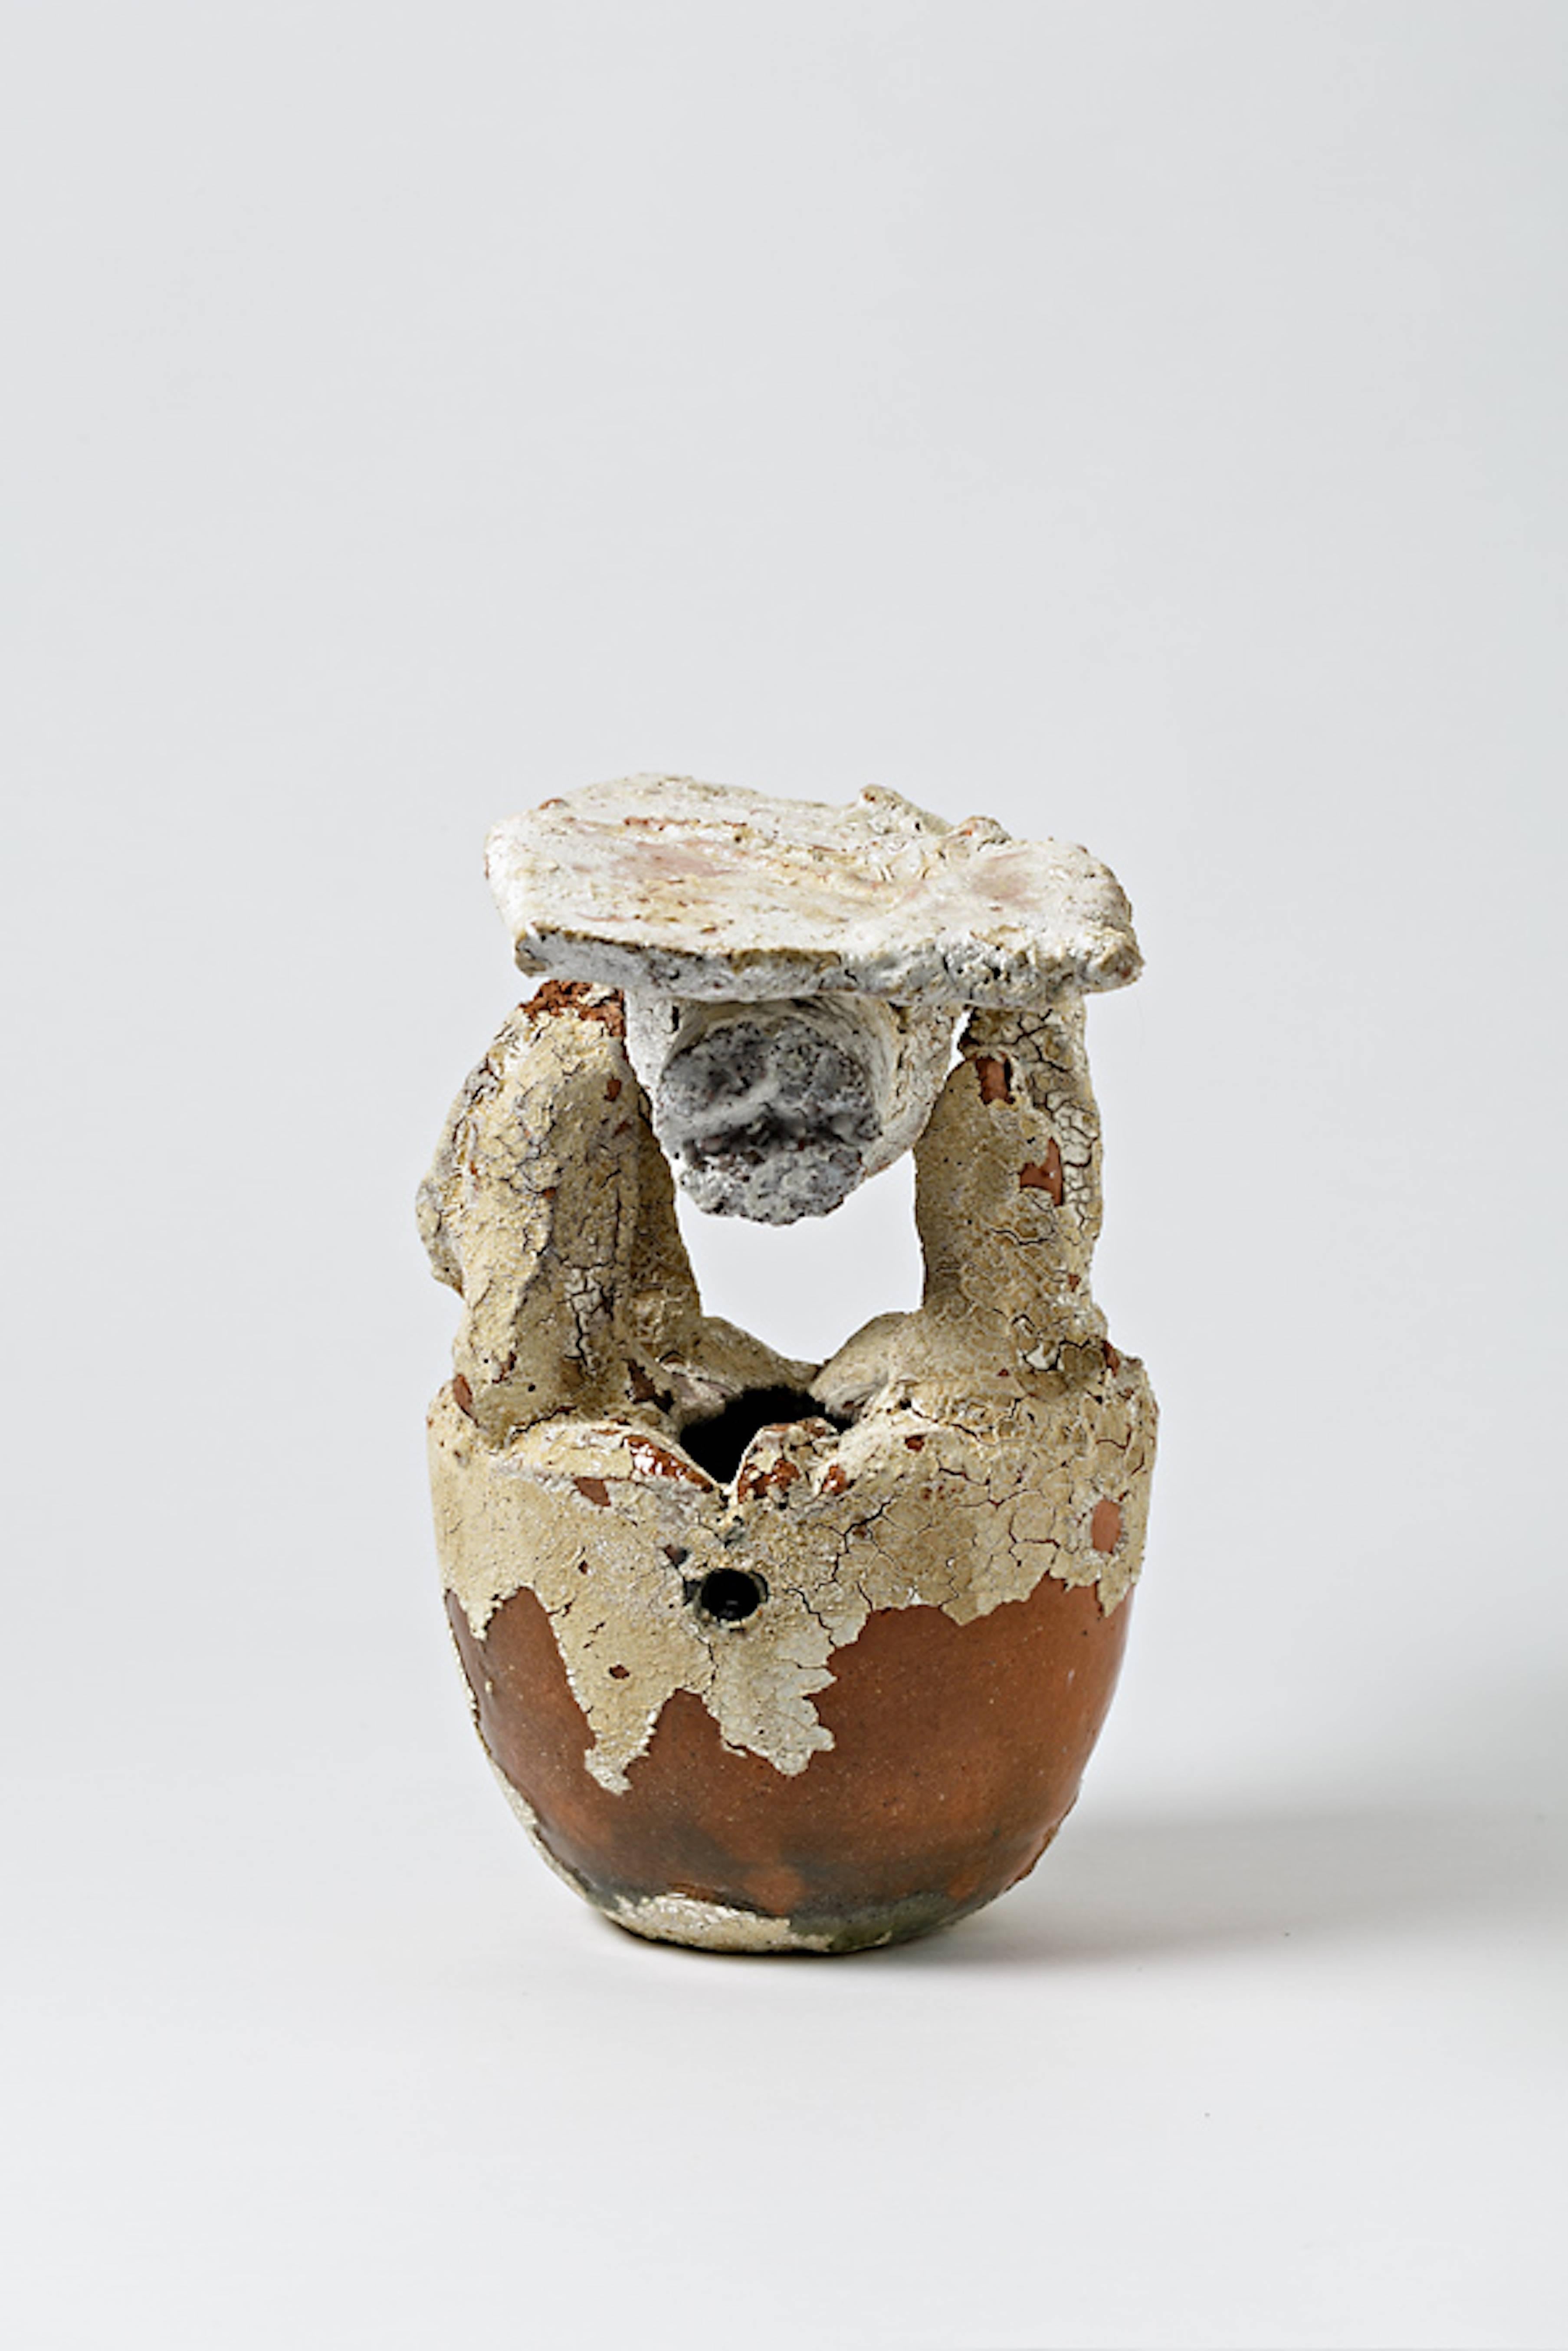 Beaux Arts Ceramic Sculpture by Camille Virot, circa 2000